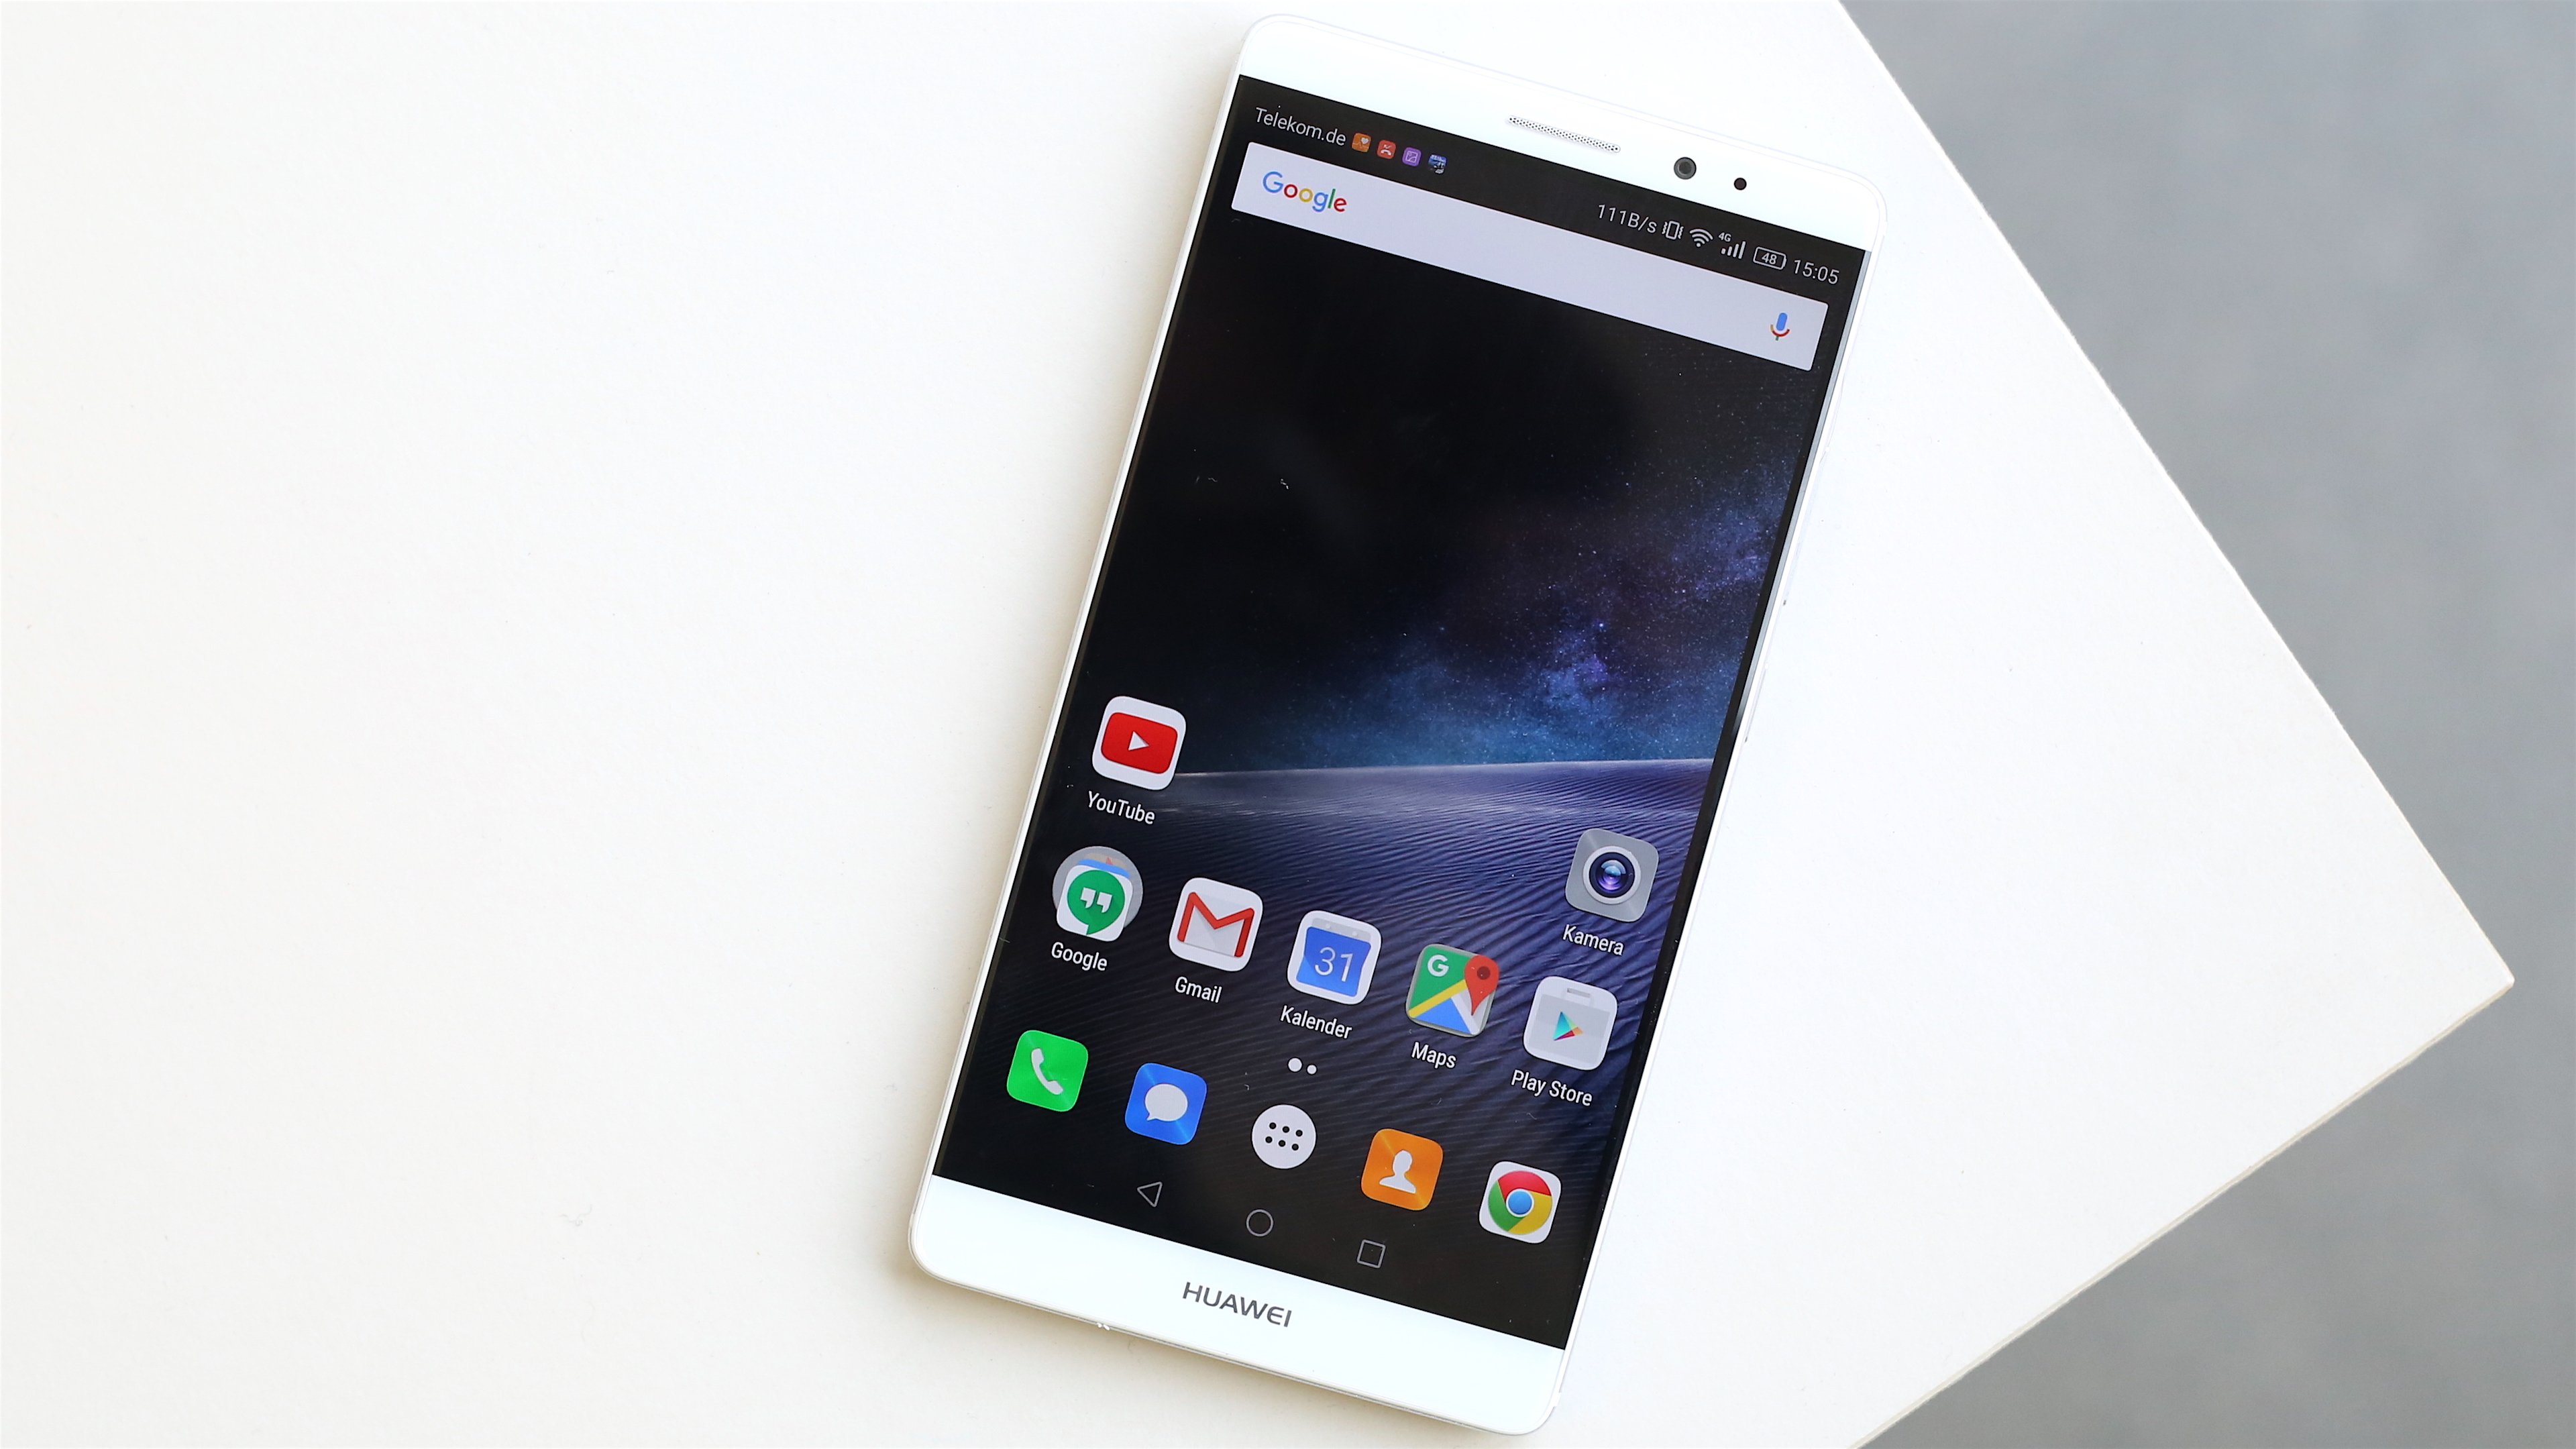 Dierentuin s nachts lexicon Publicatie Huawei Mate 8 review: the almost-perfect phablet | NextPit